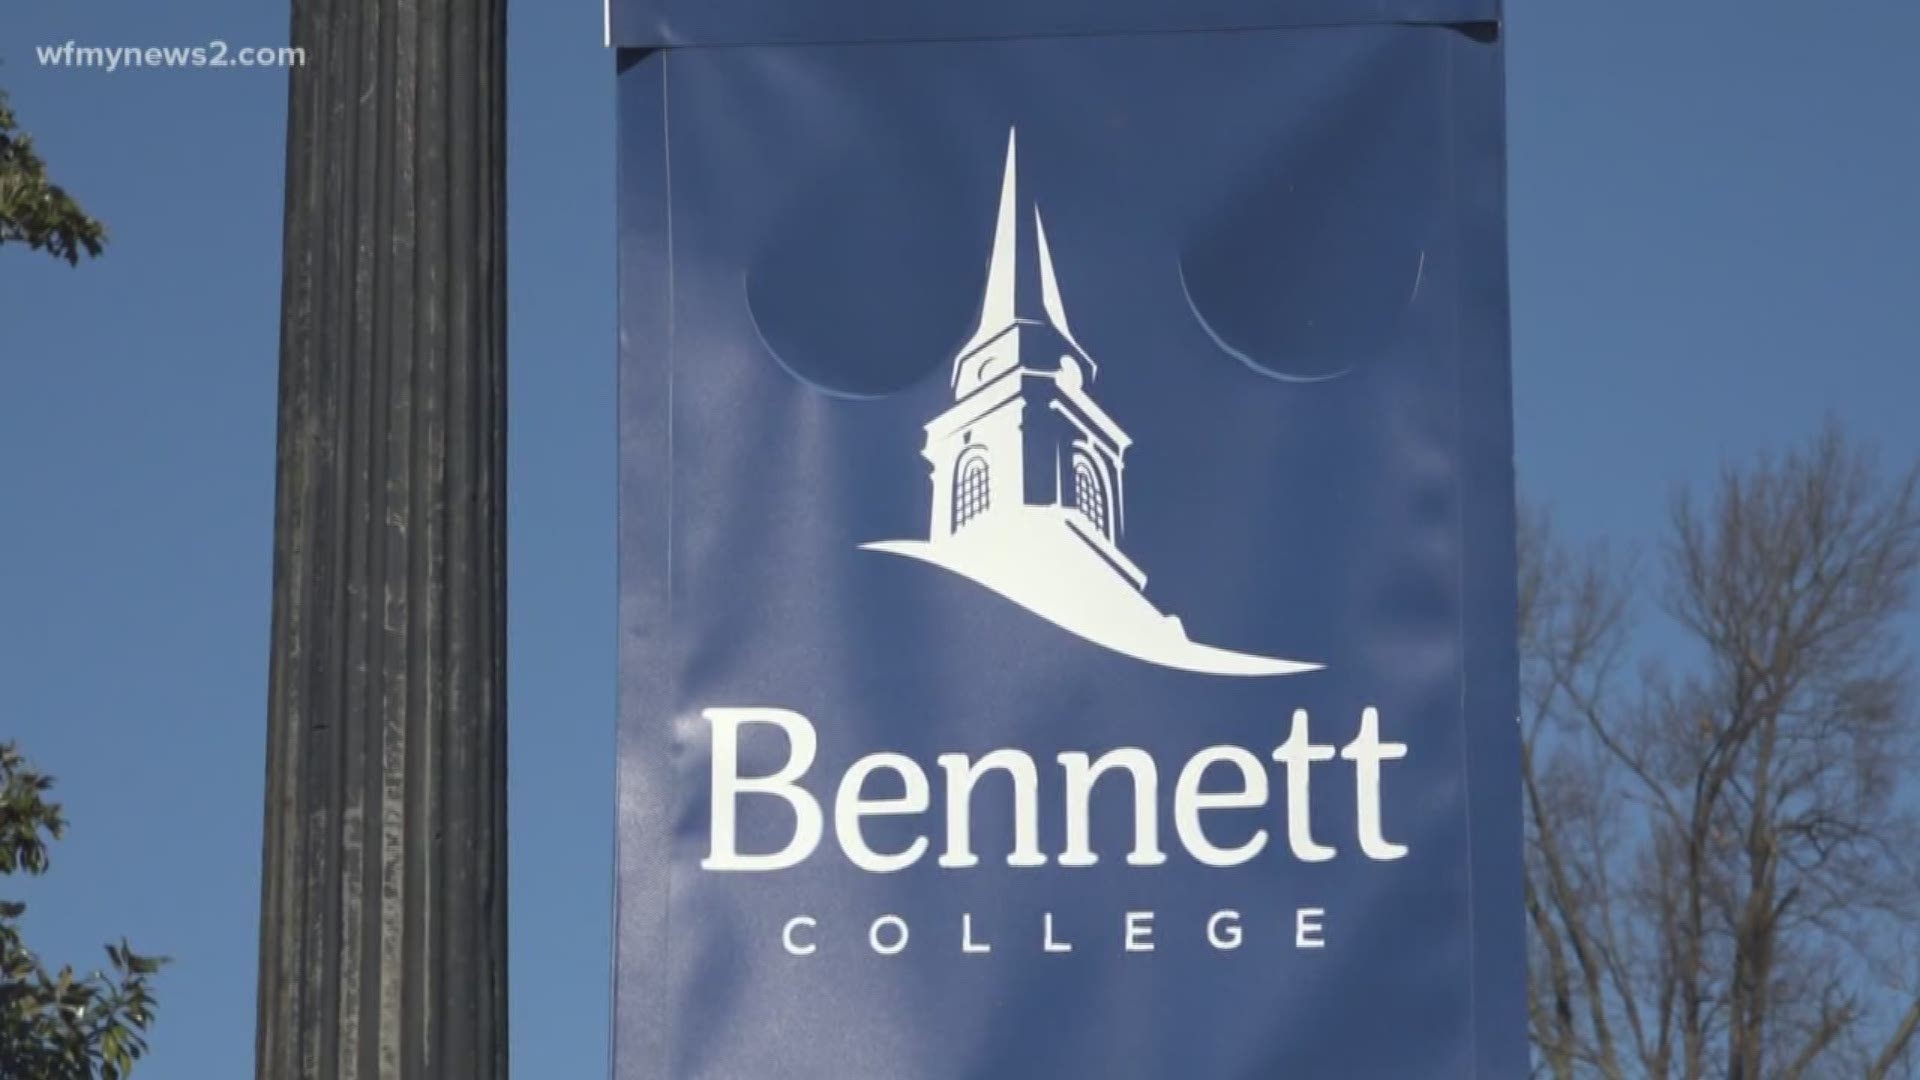 The fate of a historic women's college in Greensboro hangs in the balance. Bennett College has about 3 weeks to raise $4 million more dollars to keep its doors open.